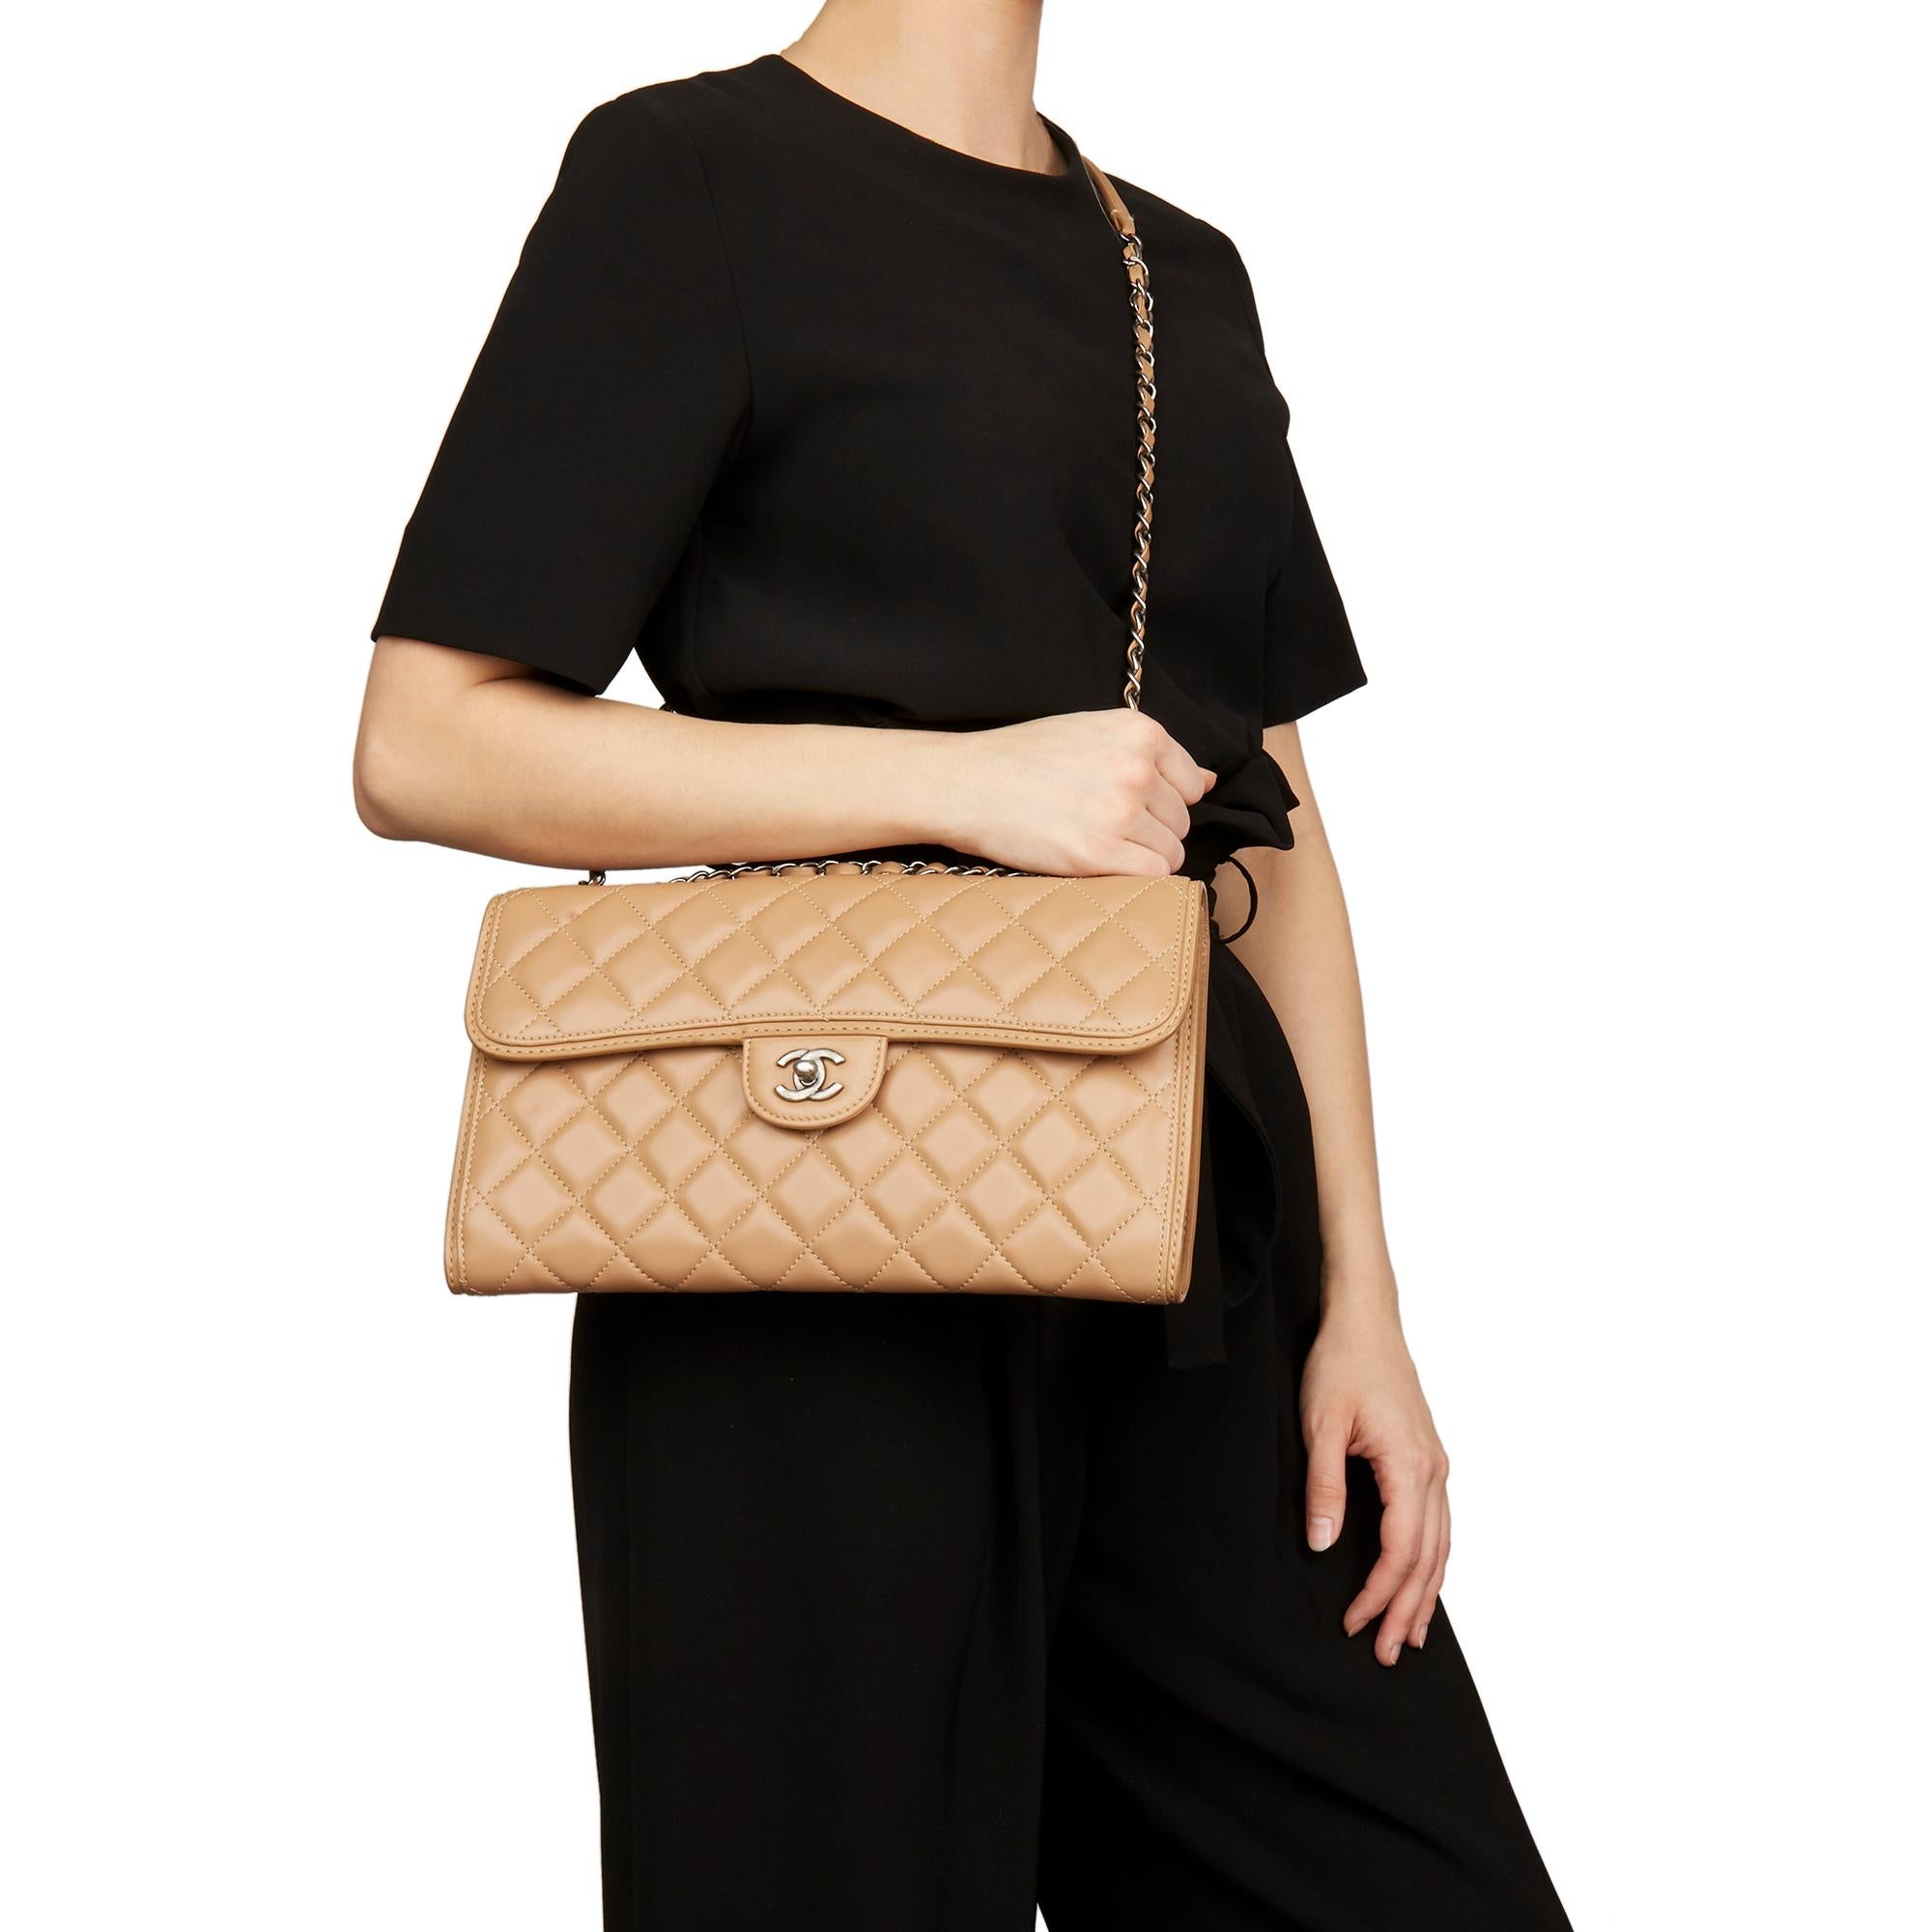 2014 Chanel Mocha Quilted Lambskin Classic Single Flap Bag 6